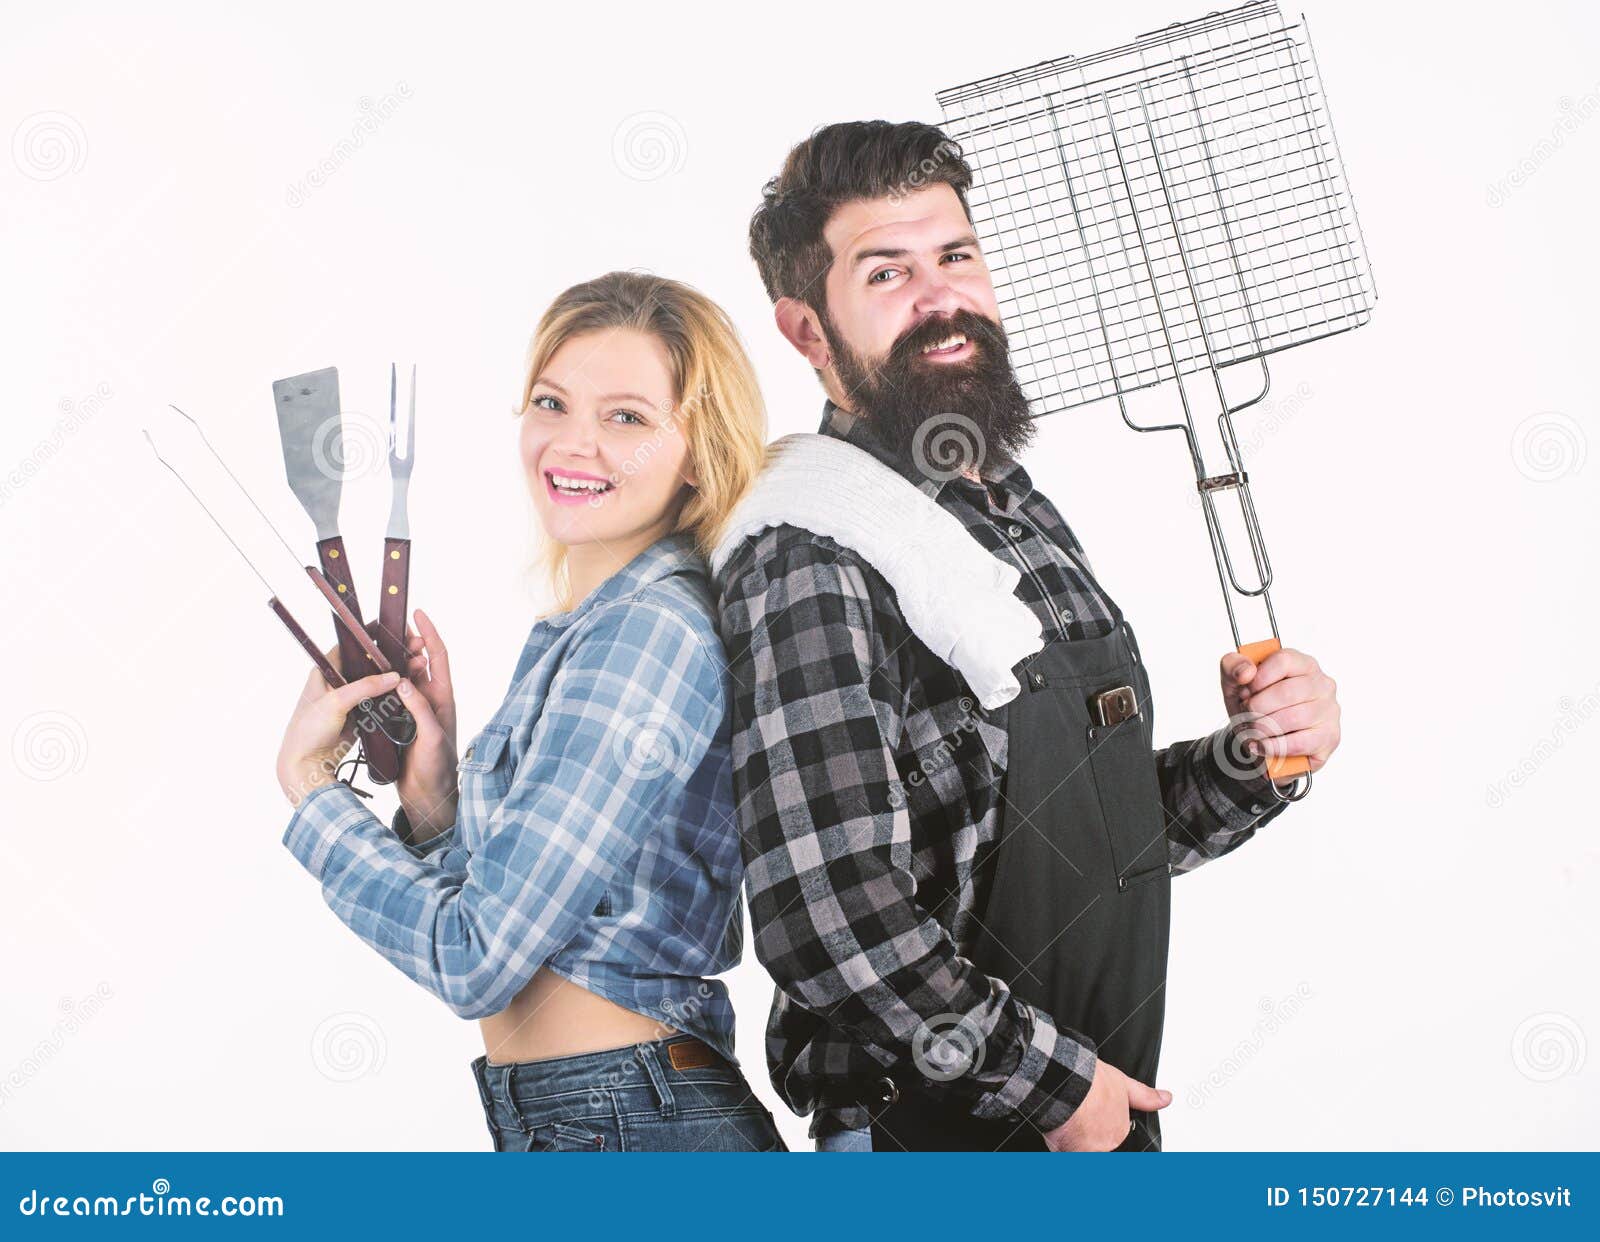 https://thumbs.dreamstime.com/z/better-grill-better-cook-happy-hipster-sexi-girl-holding-picnic-set-barbecue-family-couple-having-picnic-party-150727144.jpg